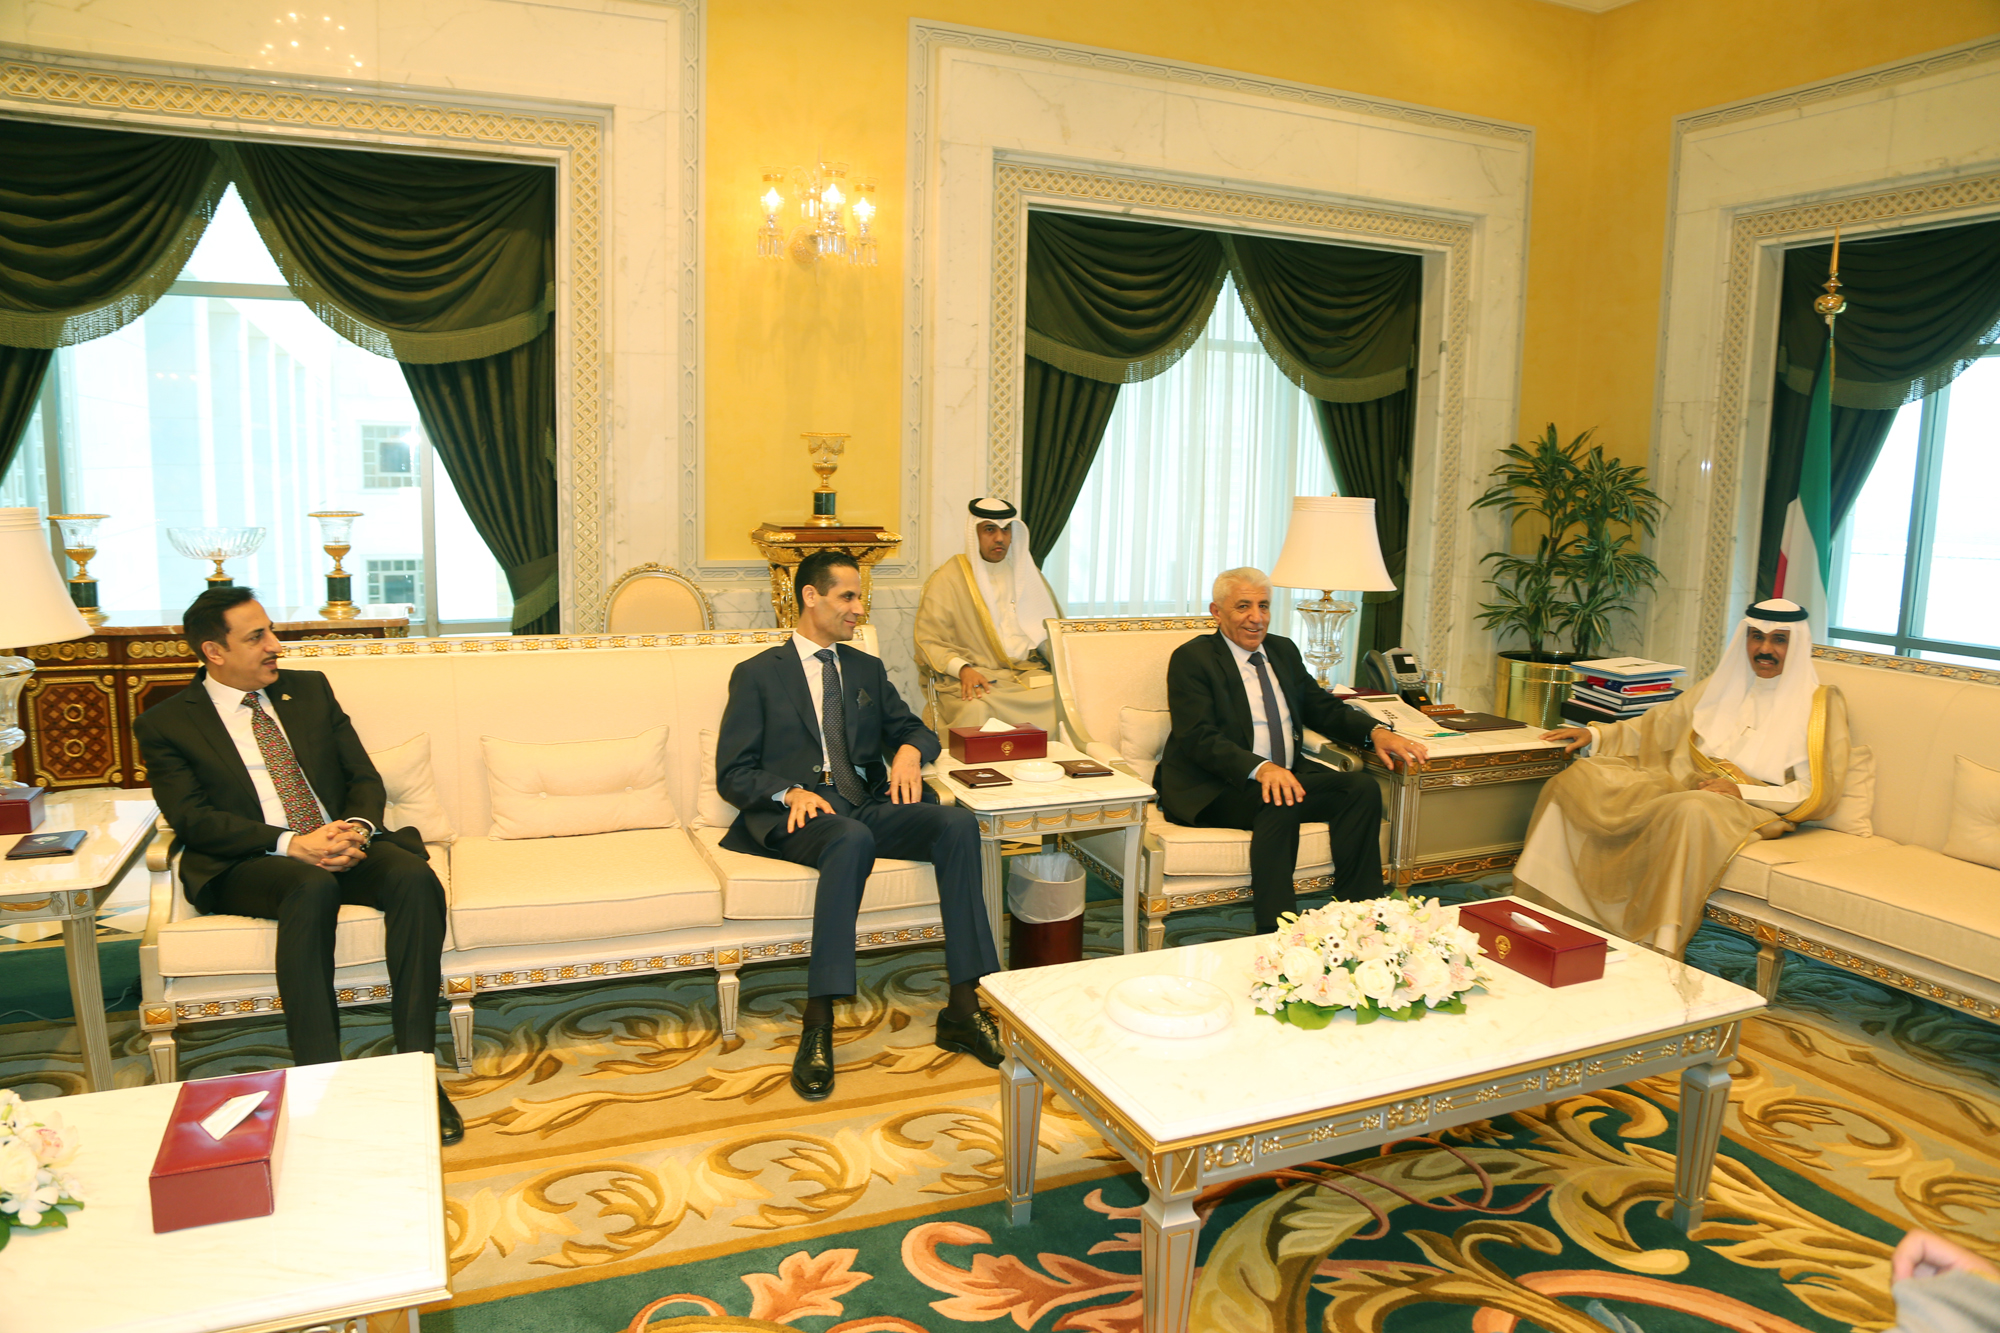 His Highness the Crown Prince Sheikh Nawaf Al-Ahmad Al-Jaber Al-Sabah Acting Chairman for Kuwait's State Audit Bureau (SAB) Adel Al-Saraawi and visiting Lebanese President of the Court of Auditors Judge Ahmad Hamdan and head of the Court of Audit Jud